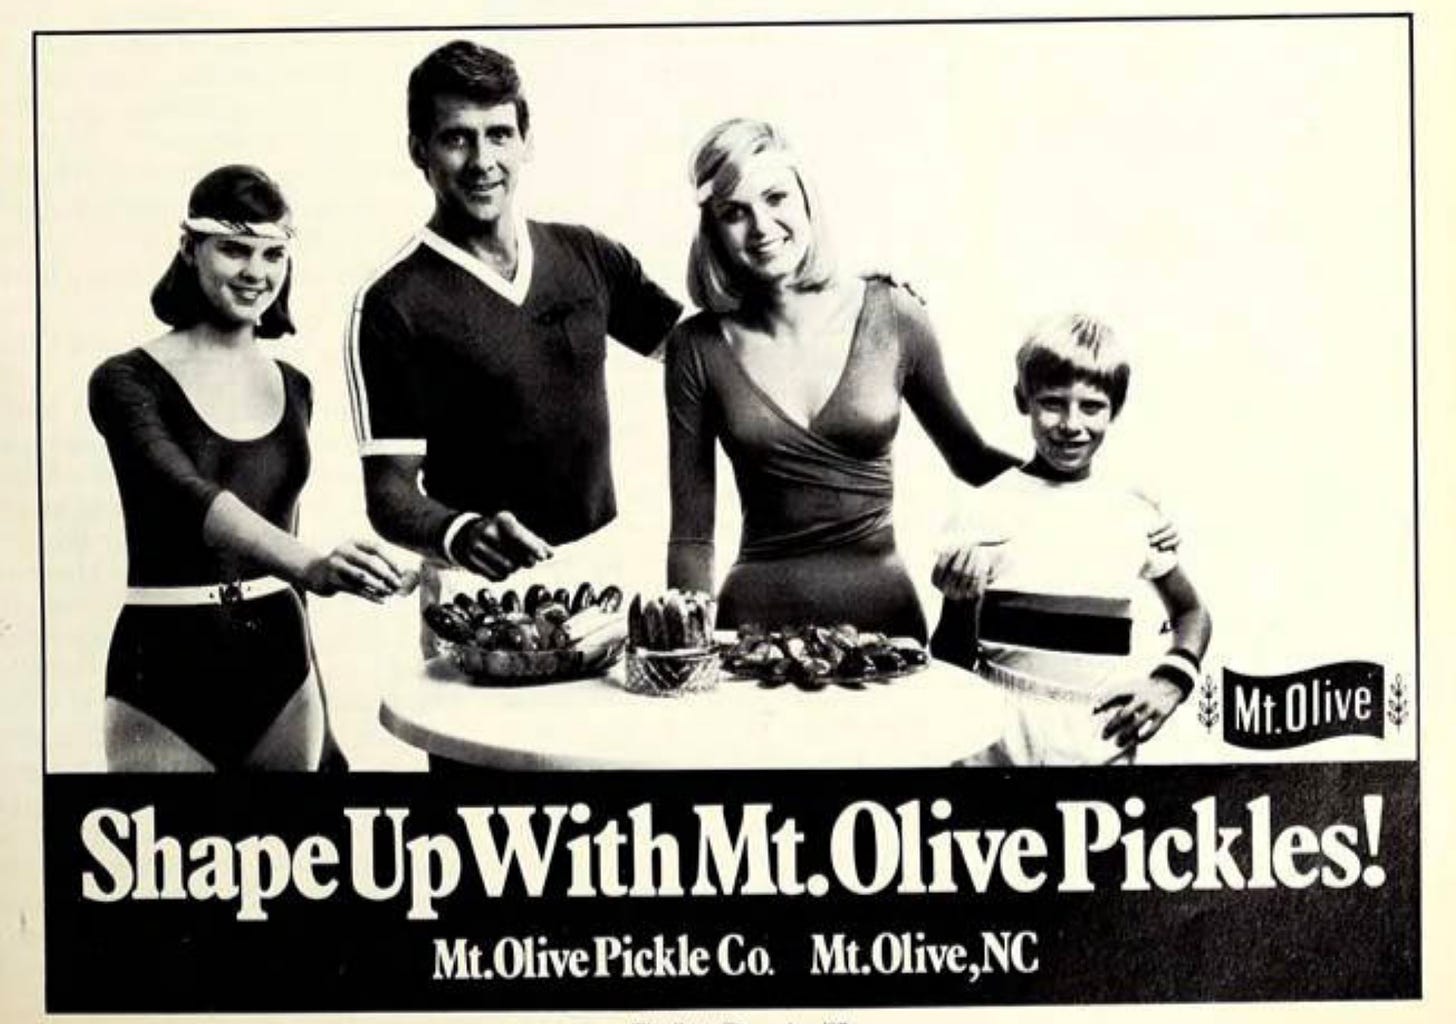 mt. olive pickle ad